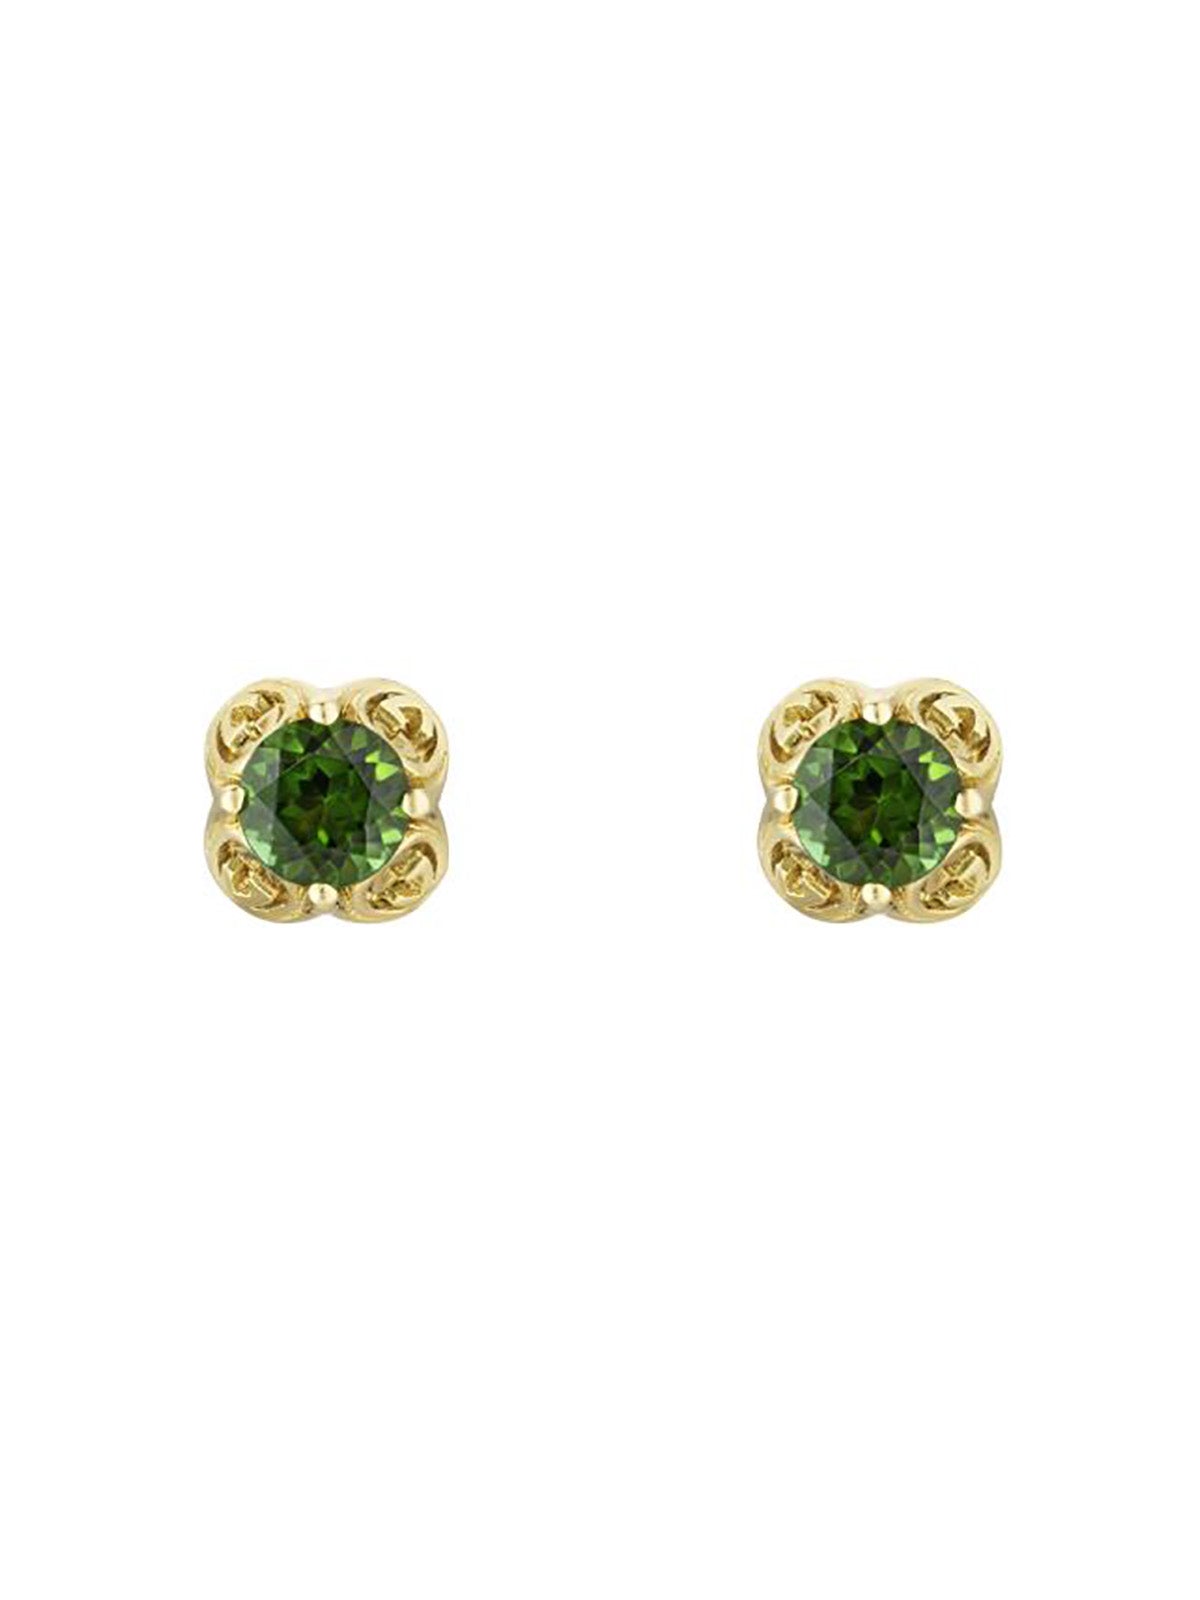 Gucci Interlocking G Stud Earrings in 18ct Yellow Gold and Tourmaline